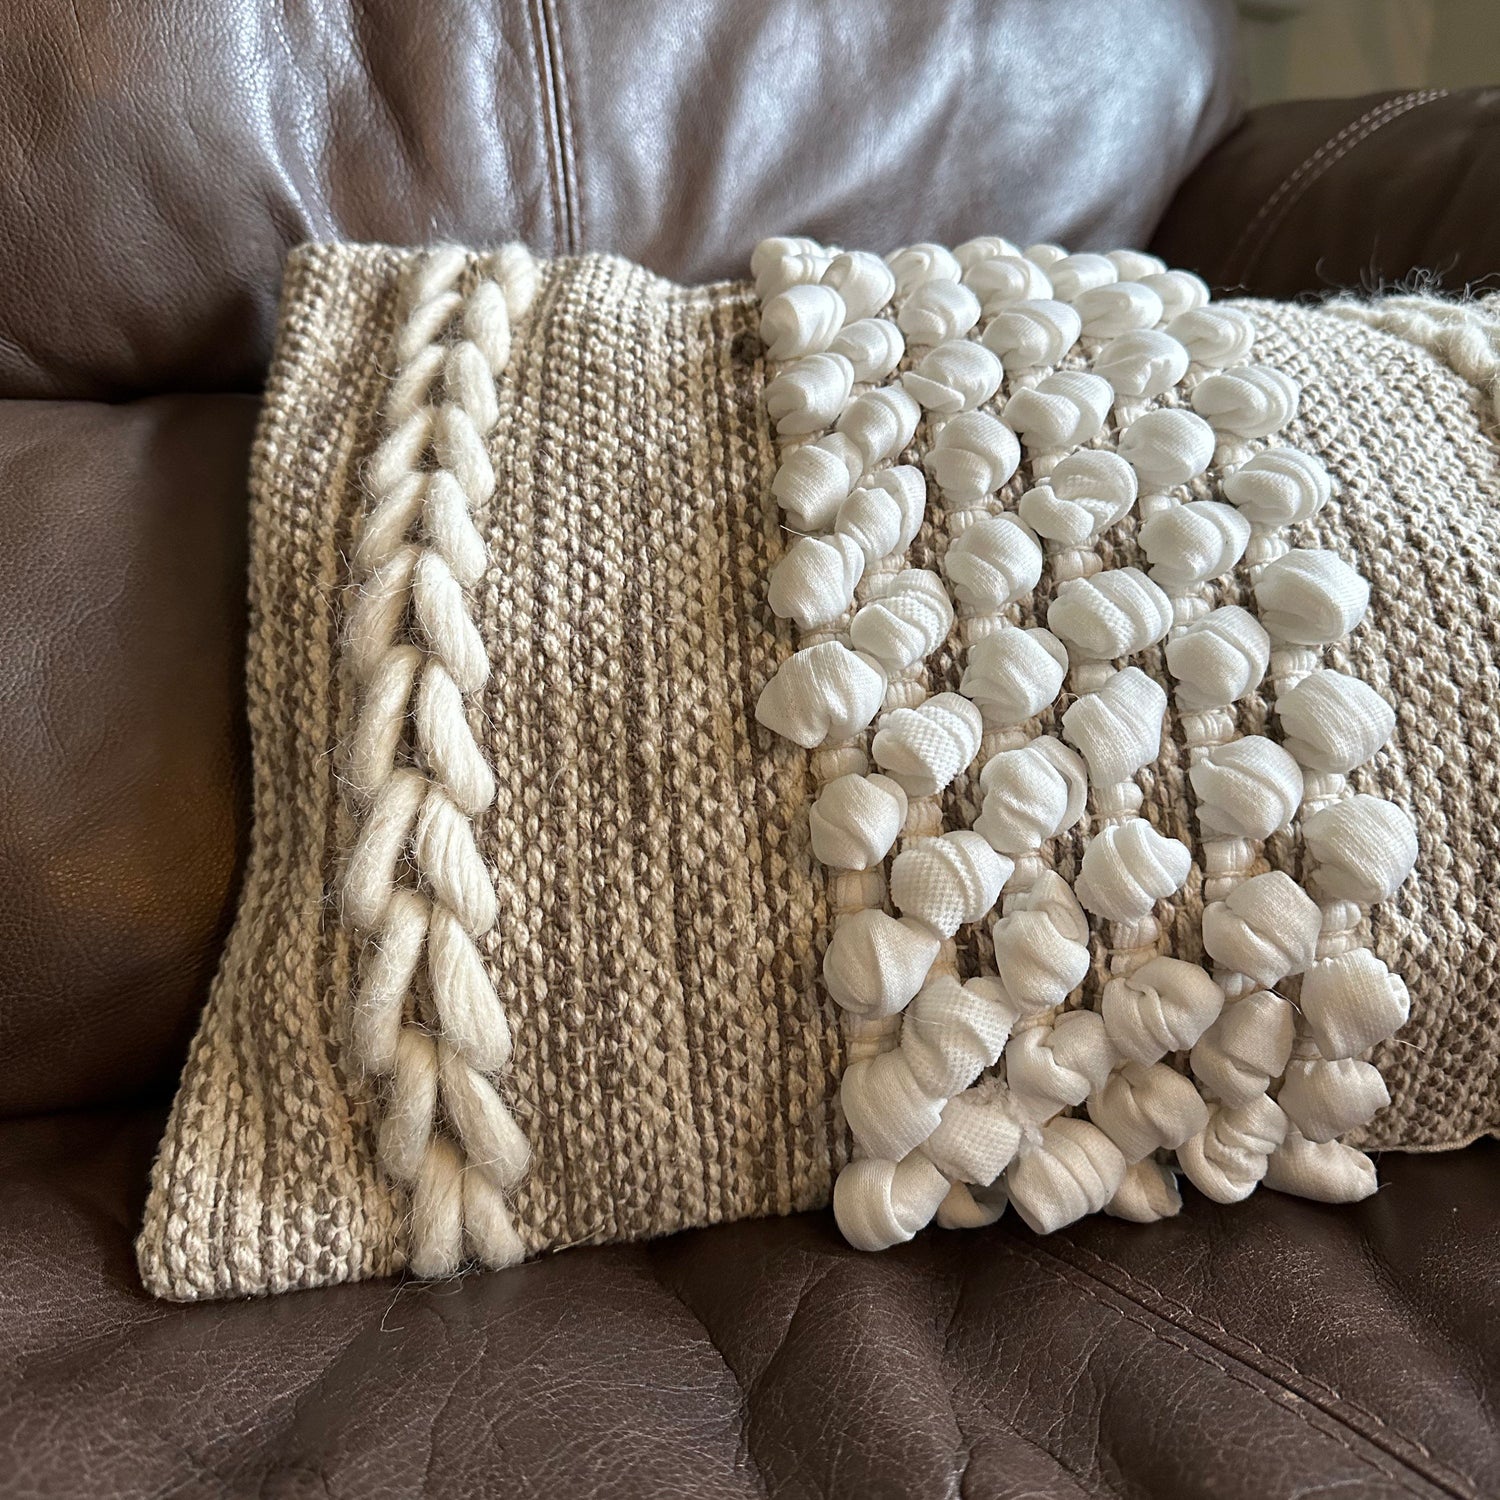 Luxury Beige Boho Cushion 12 x 20 | Woven Wool Cover | Plait Detail | Braided Pillow | Comes Filled by Maxlume